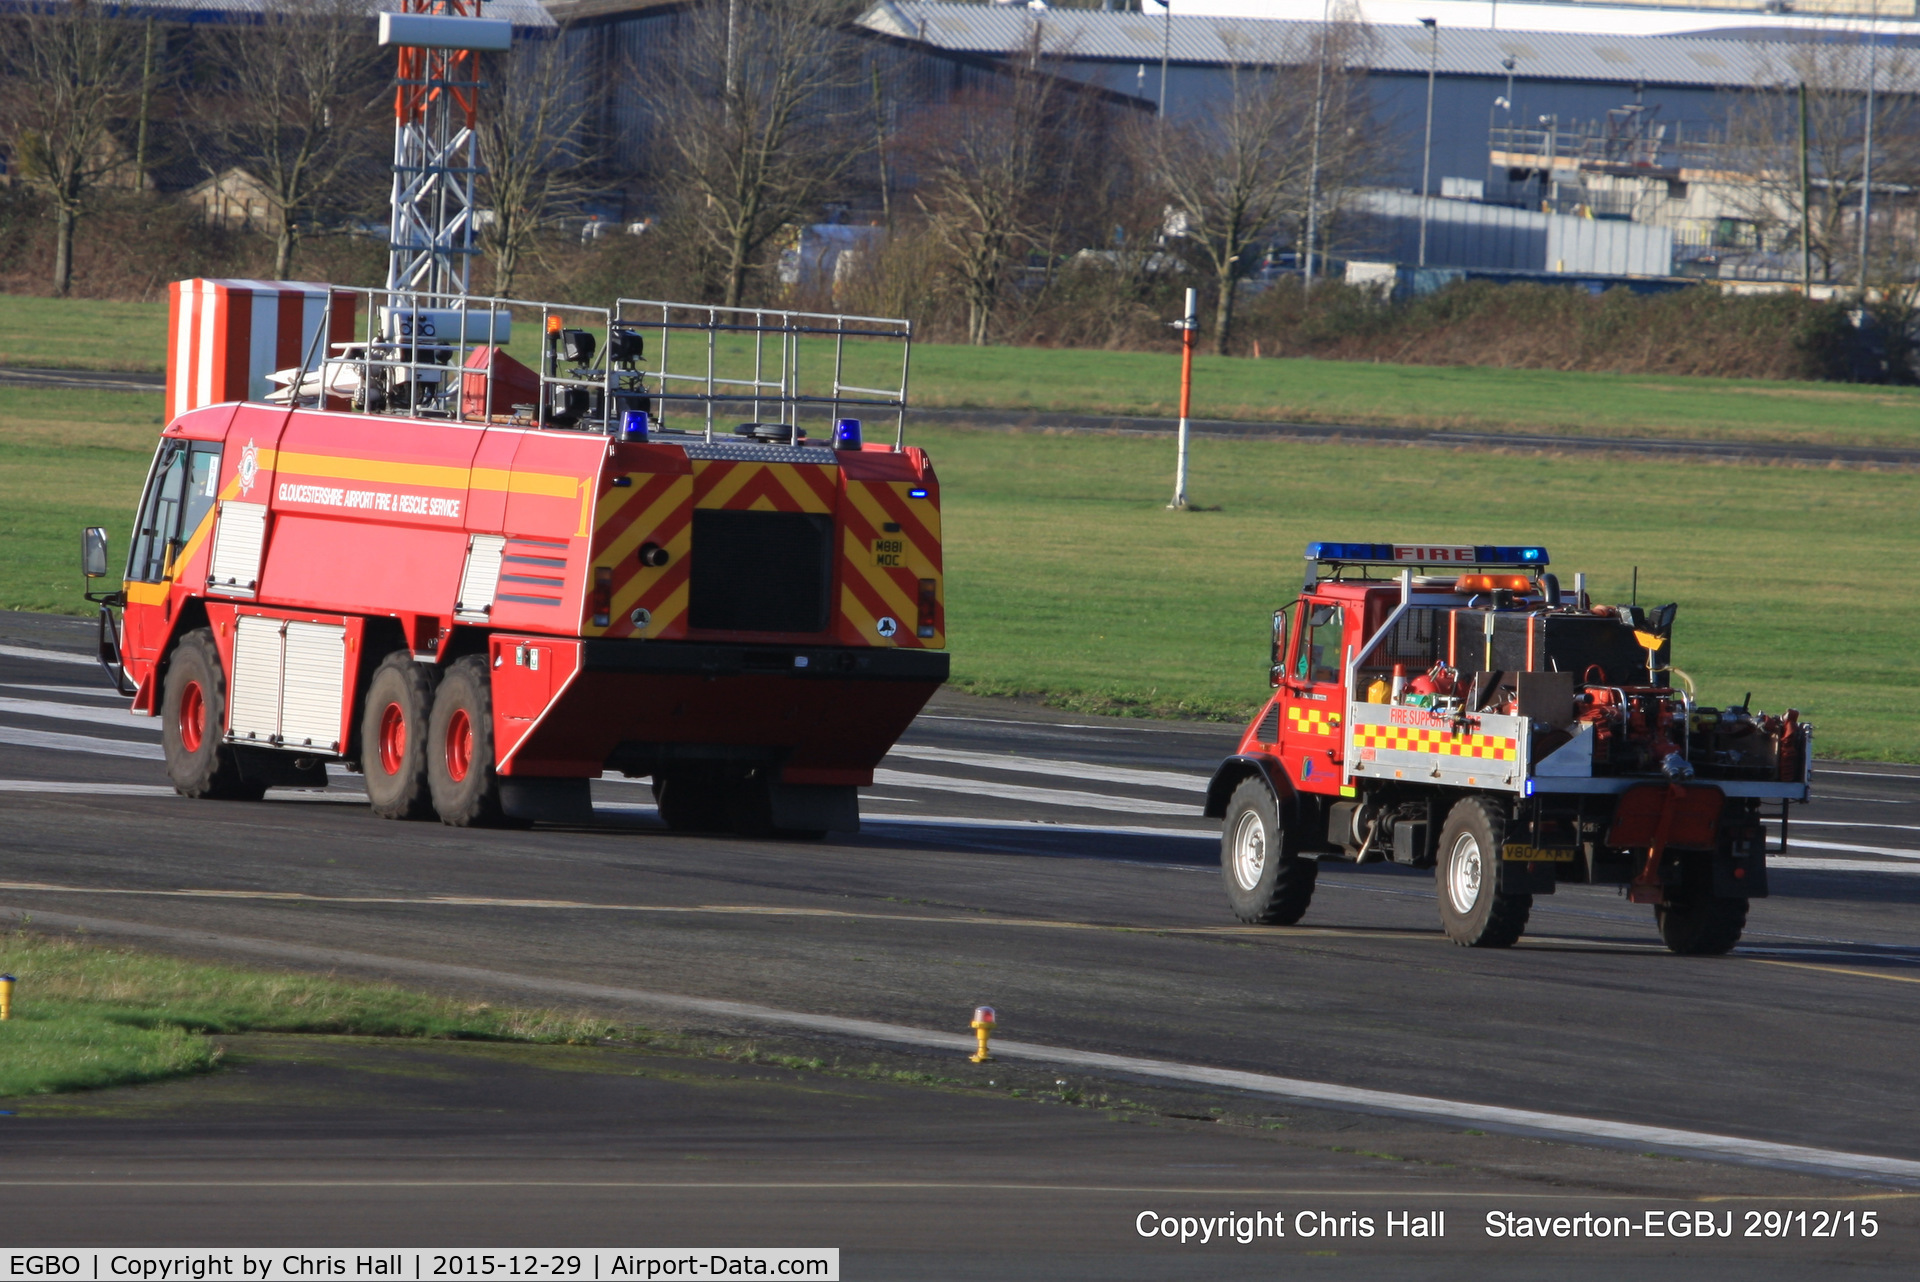 Wolverhampton Airport, Wolverhampton, England United Kingdom (EGBO) - Staverton's fire and rescue team going on an exercise